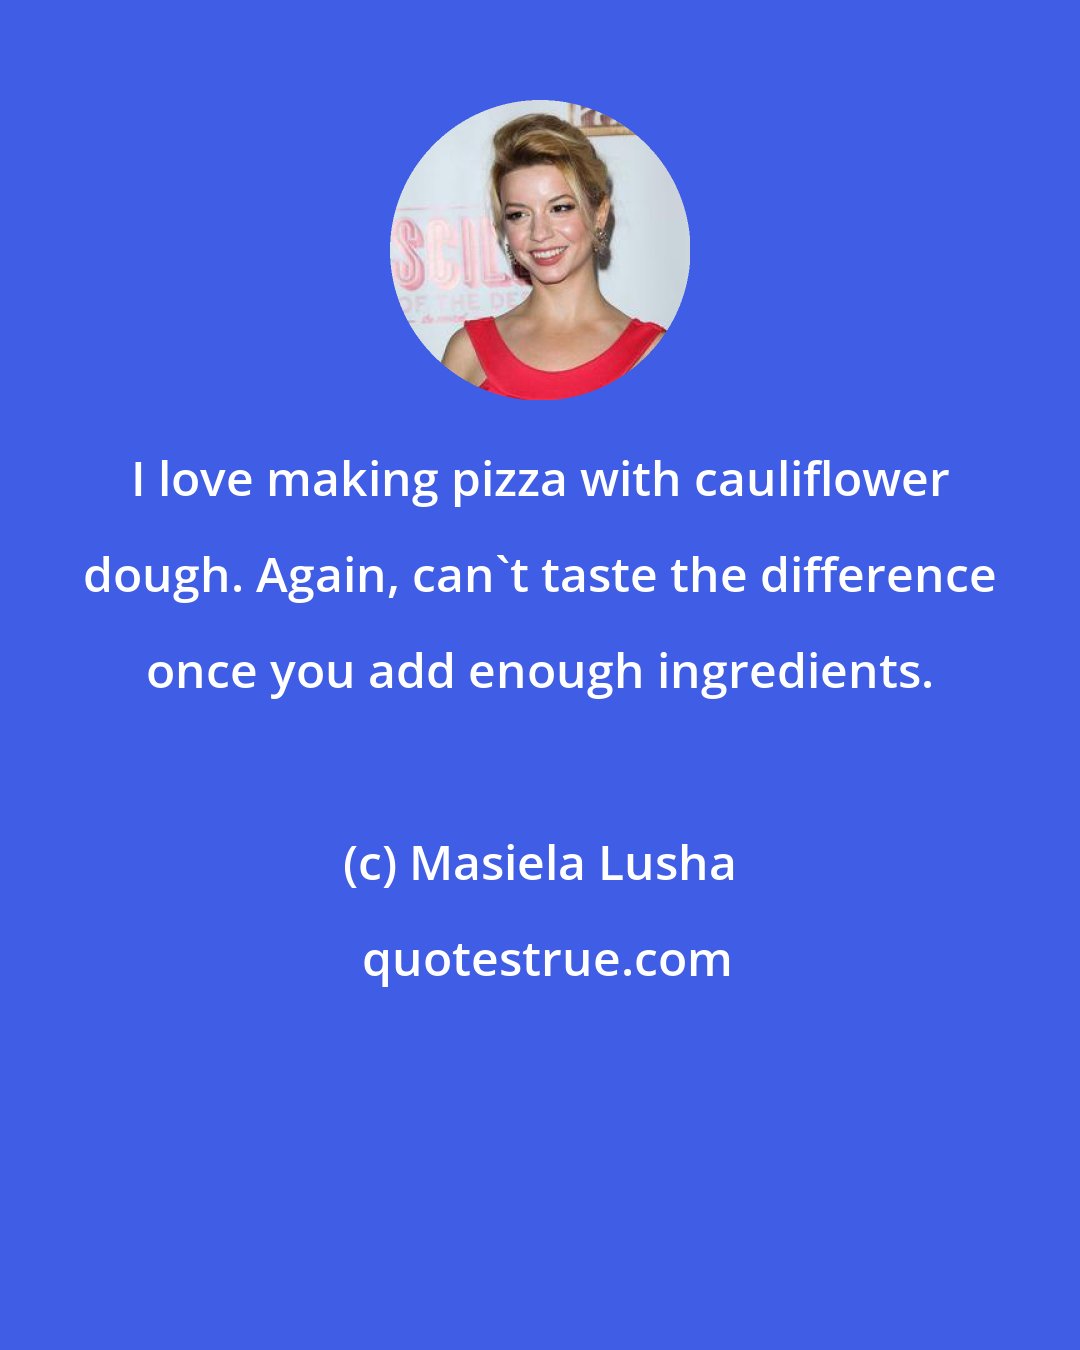 Masiela Lusha: I love making pizza with cauliflower dough. Again, can't taste the difference once you add enough ingredients.